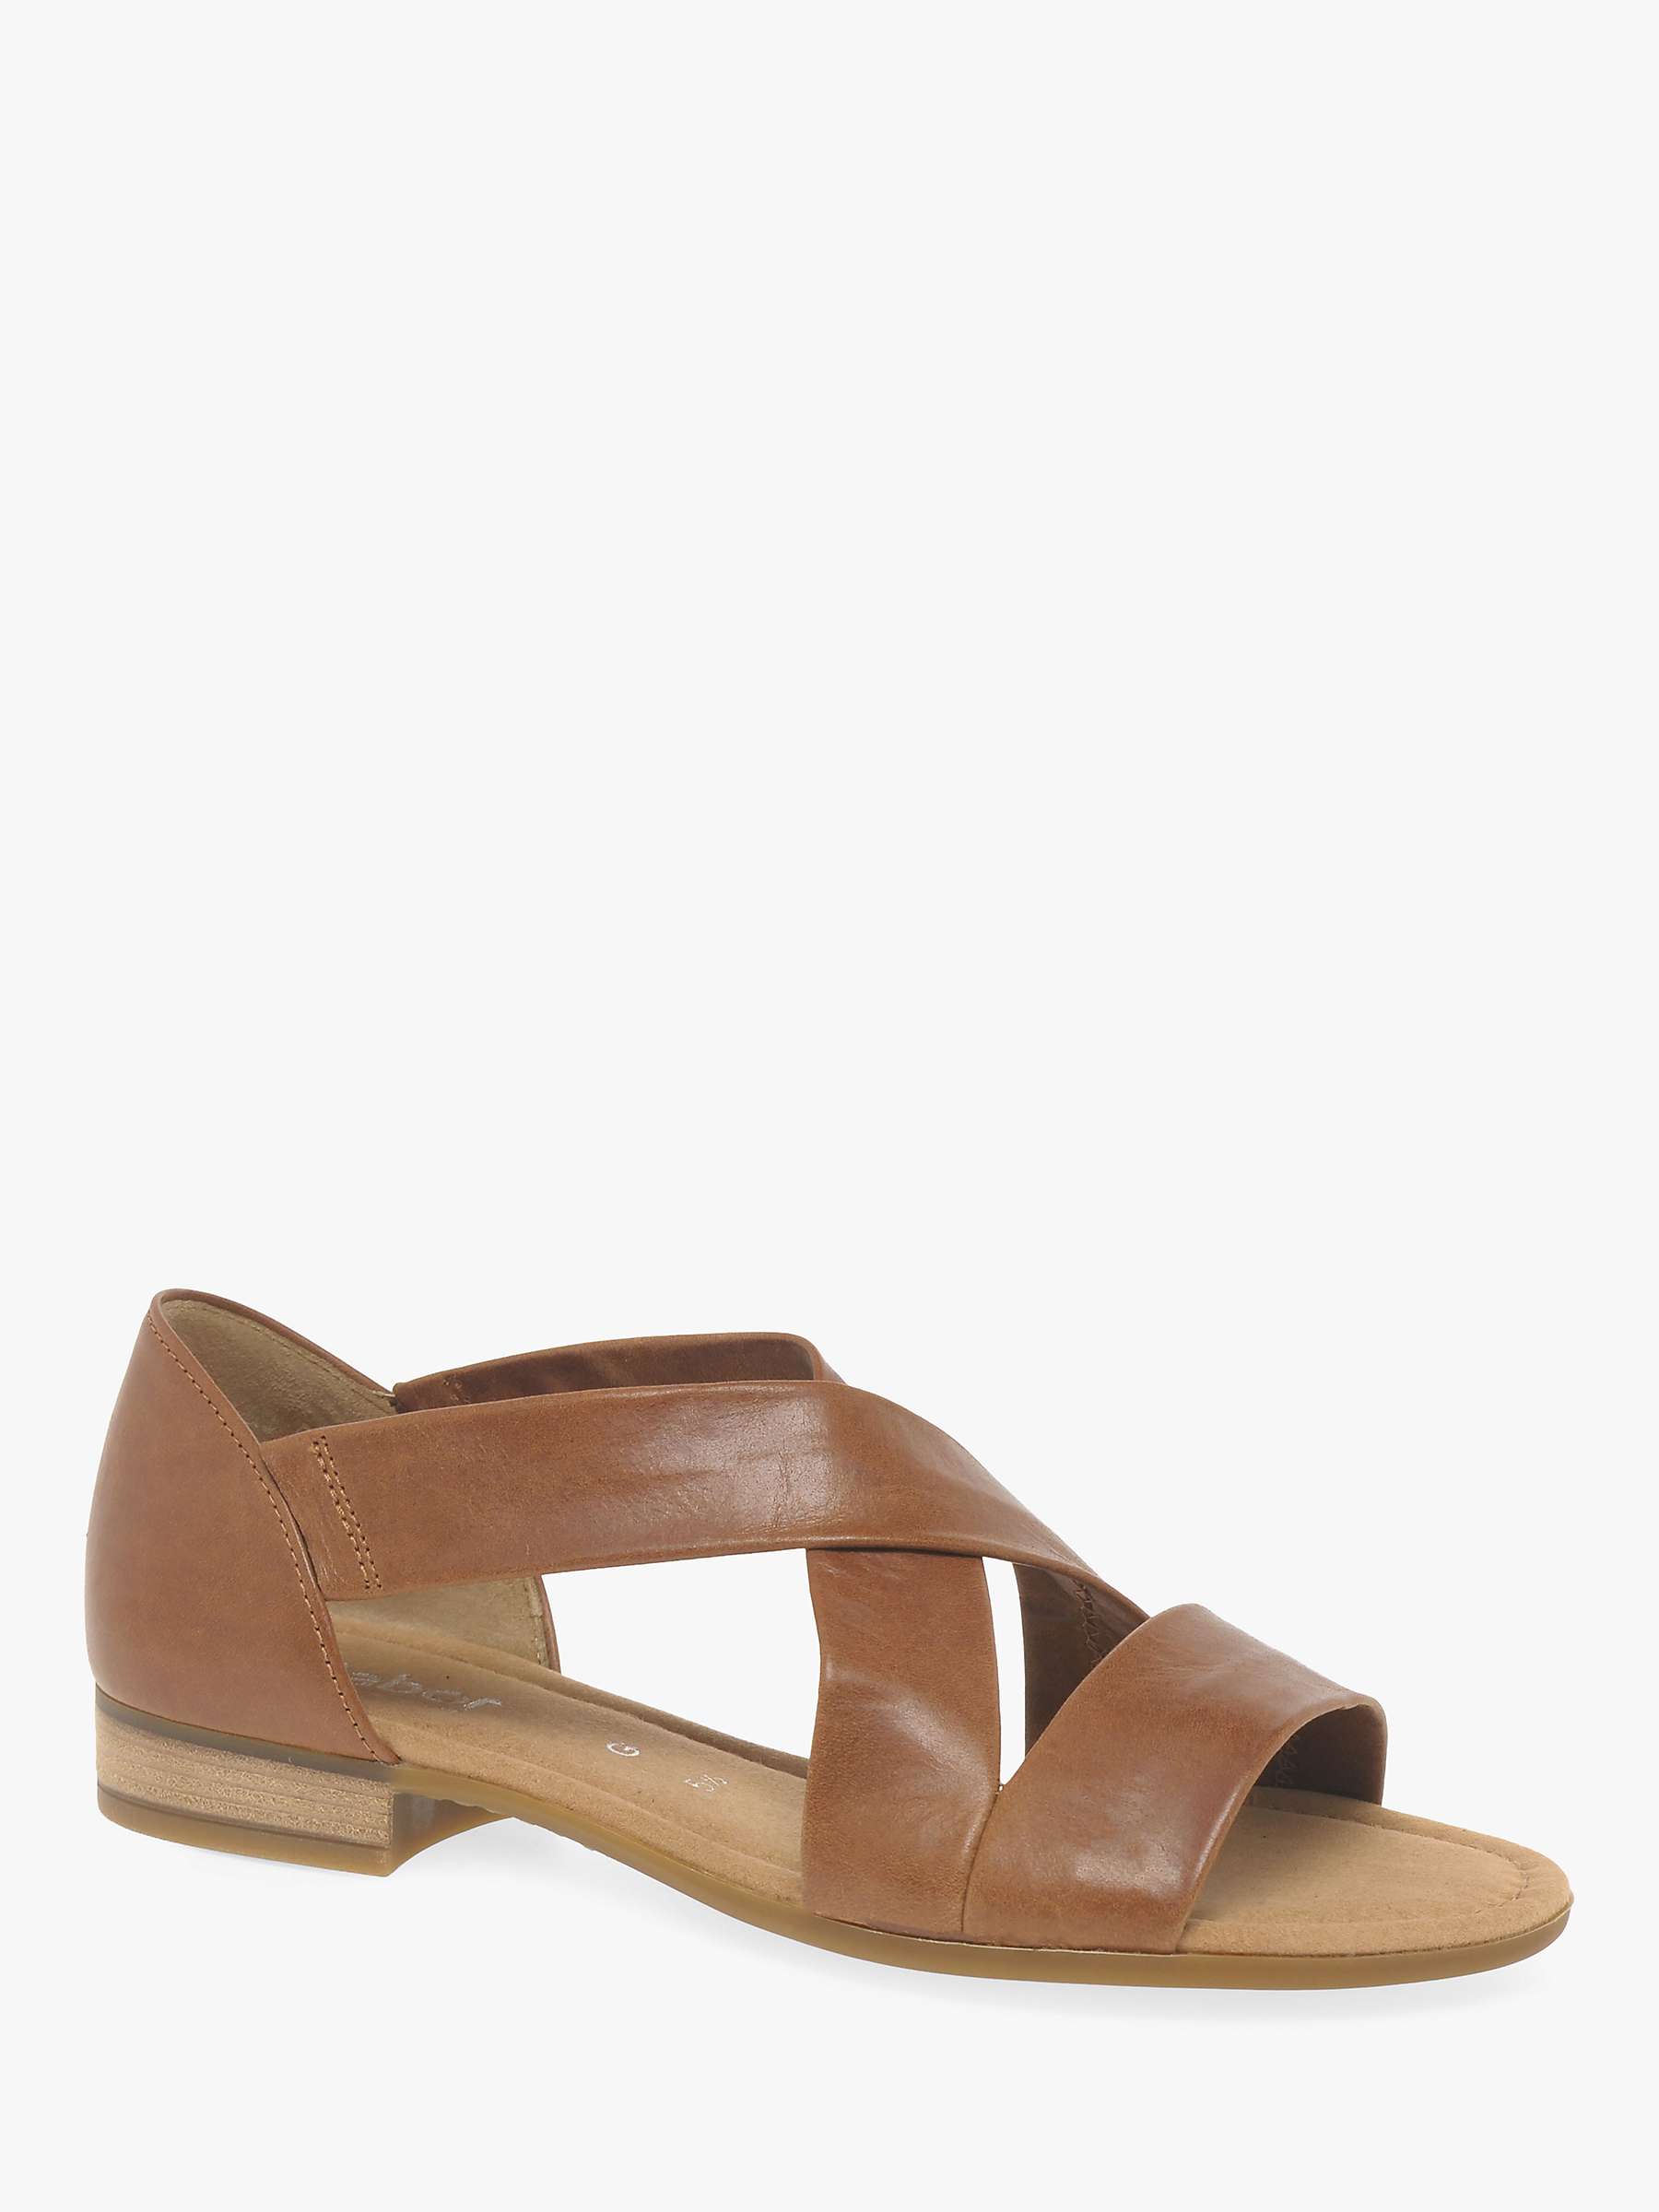 Buy Gabor Sweetly Wide Fit Leather Strap Sandals Online at johnlewis.com